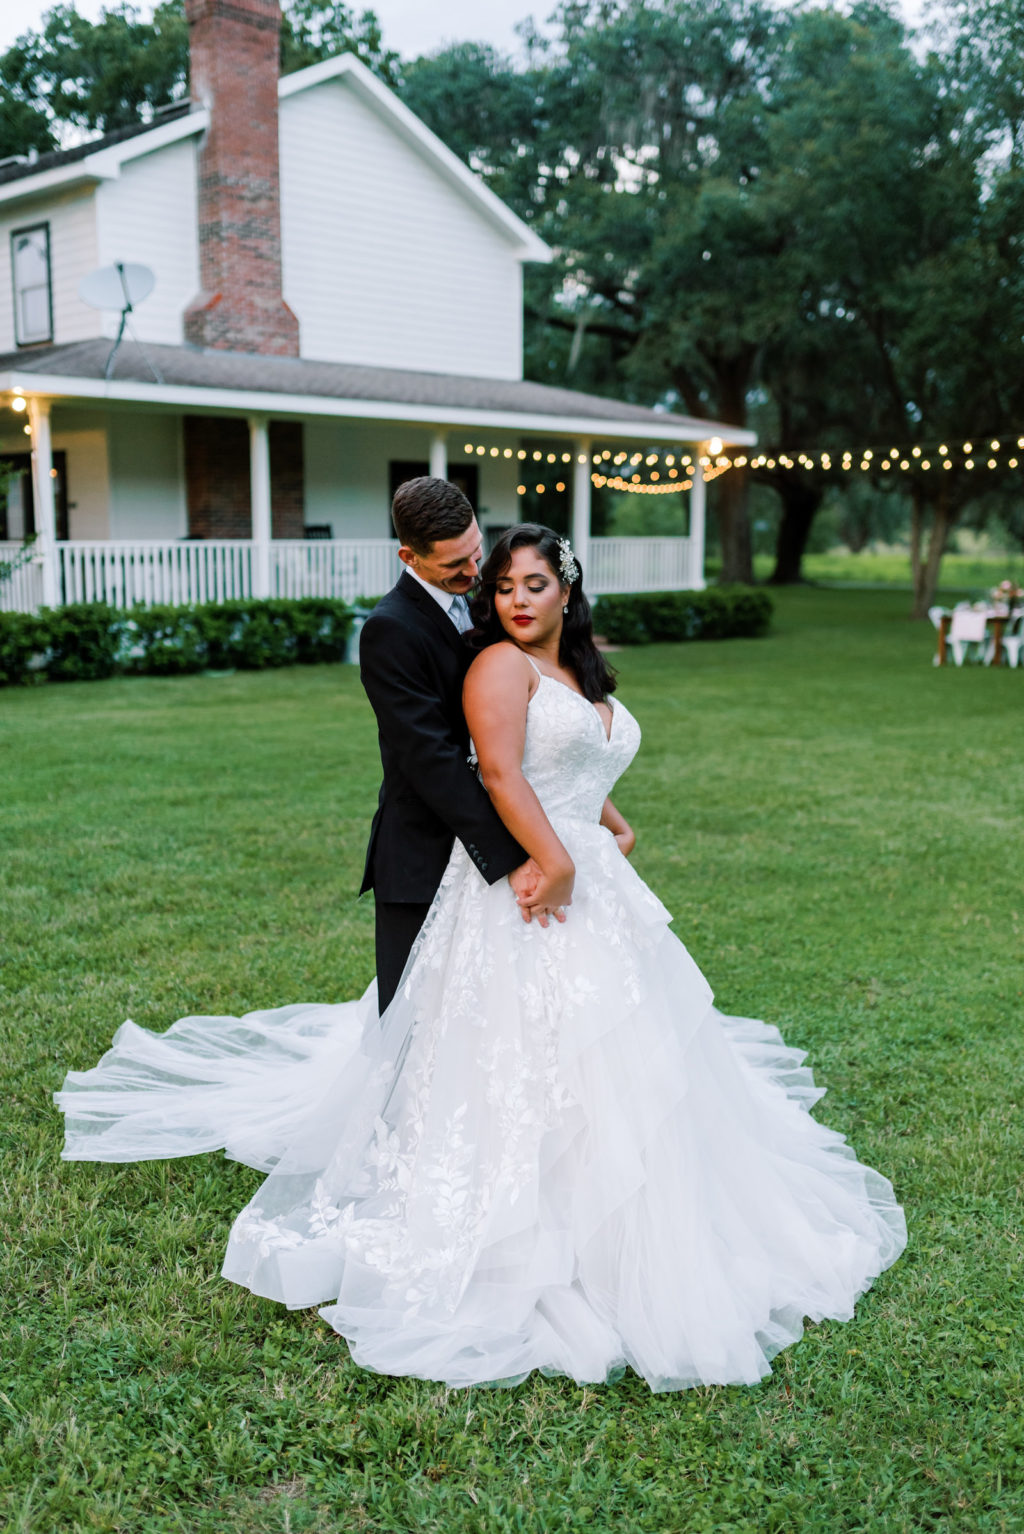 Tampa Bay Bride and Groom at Two Sisters Ranch in Dade City Wedding, Bride in Ballgown Style White Dress with V Neckline and Vintage Inspired Hair and Makeup with Hollywood Curls | Florida Wedding Planner EventFull Weddings